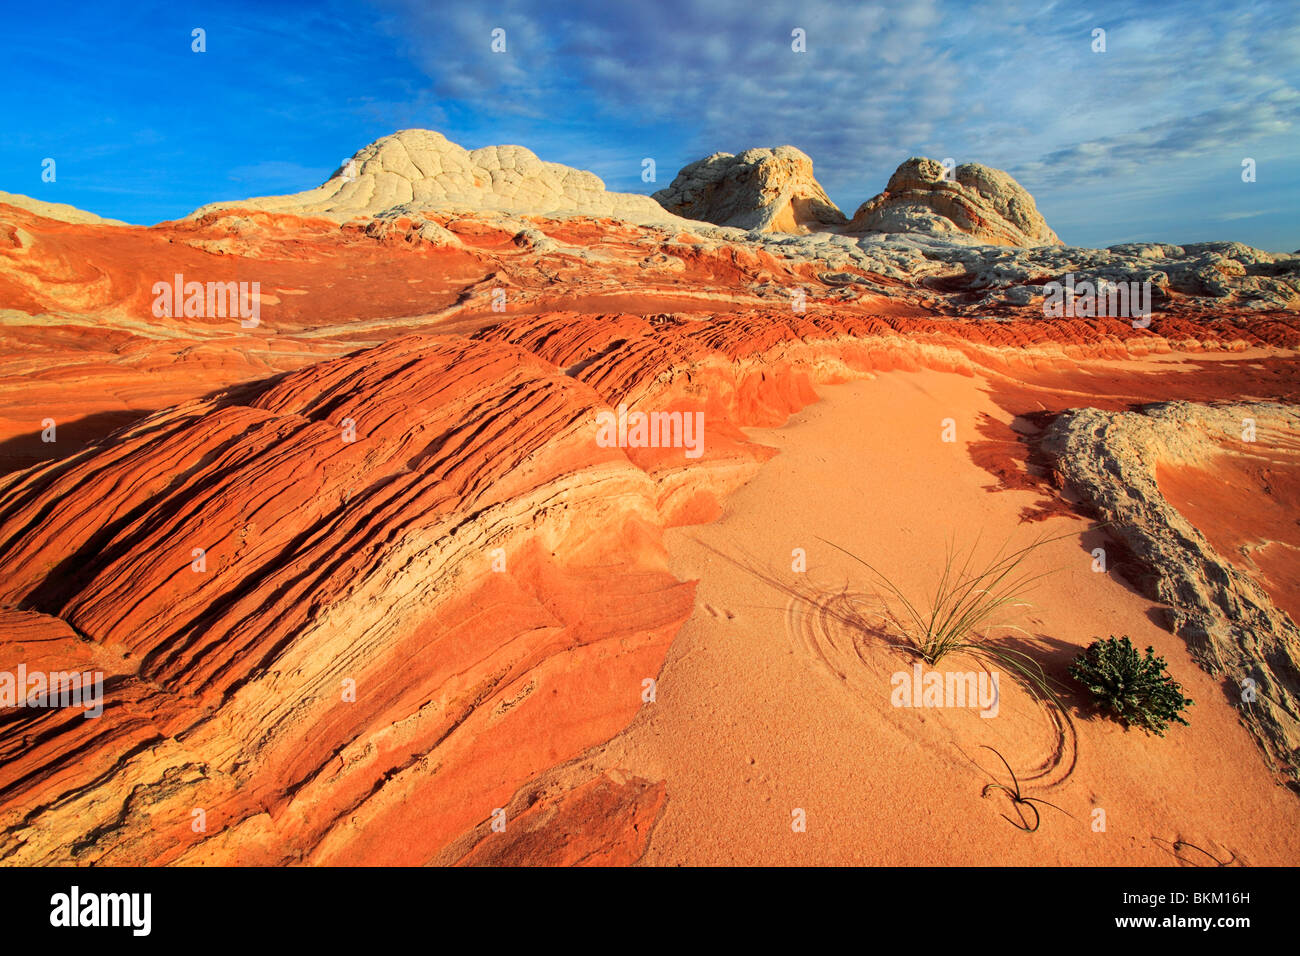 Rock formations in the White Pocket unit of the Vermilion Cliffs National Monument, Arizona Stock Photo